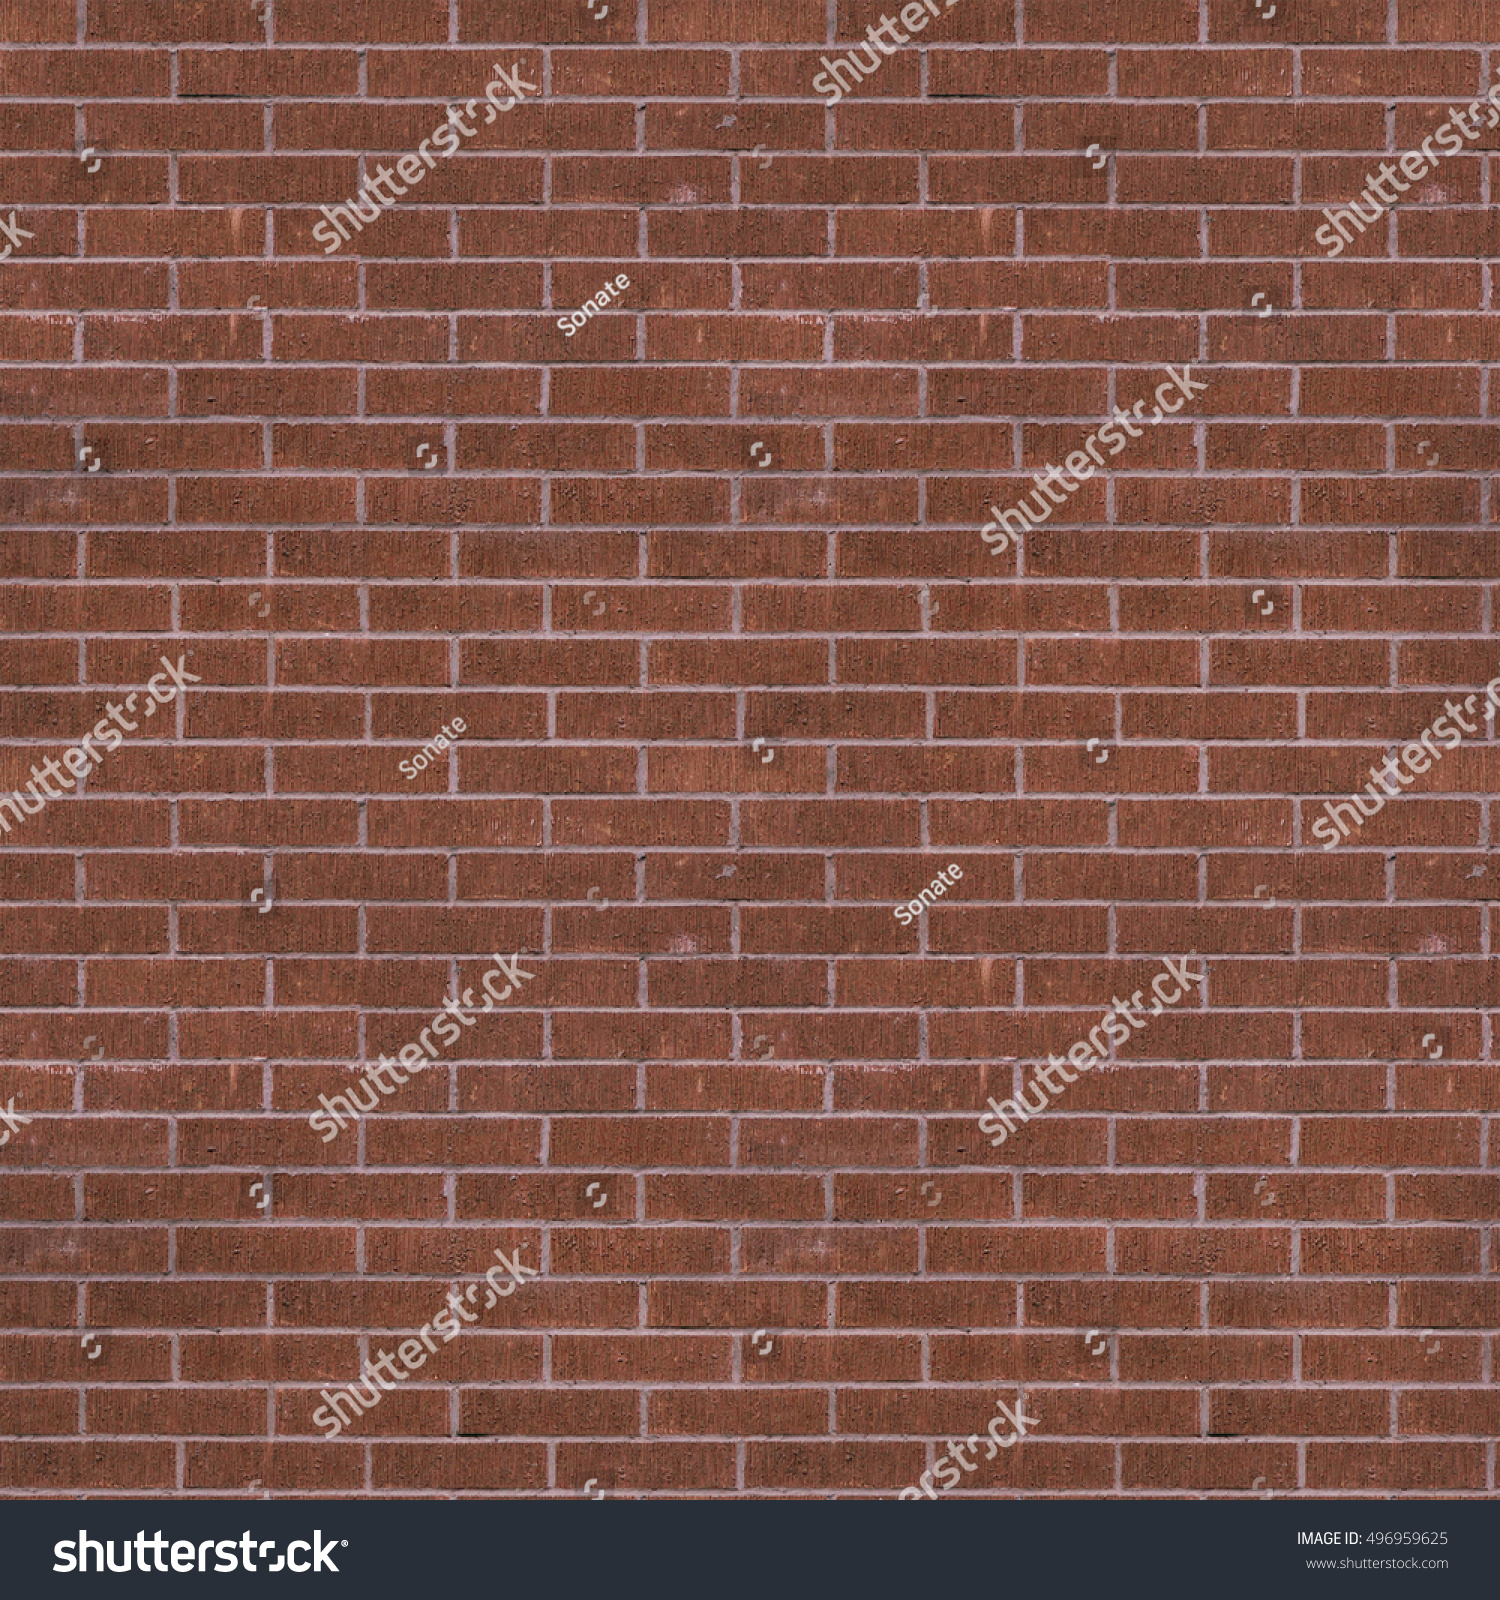 Seamless Brown Brick Wall Texture Background Stock Photo 496959625 ...